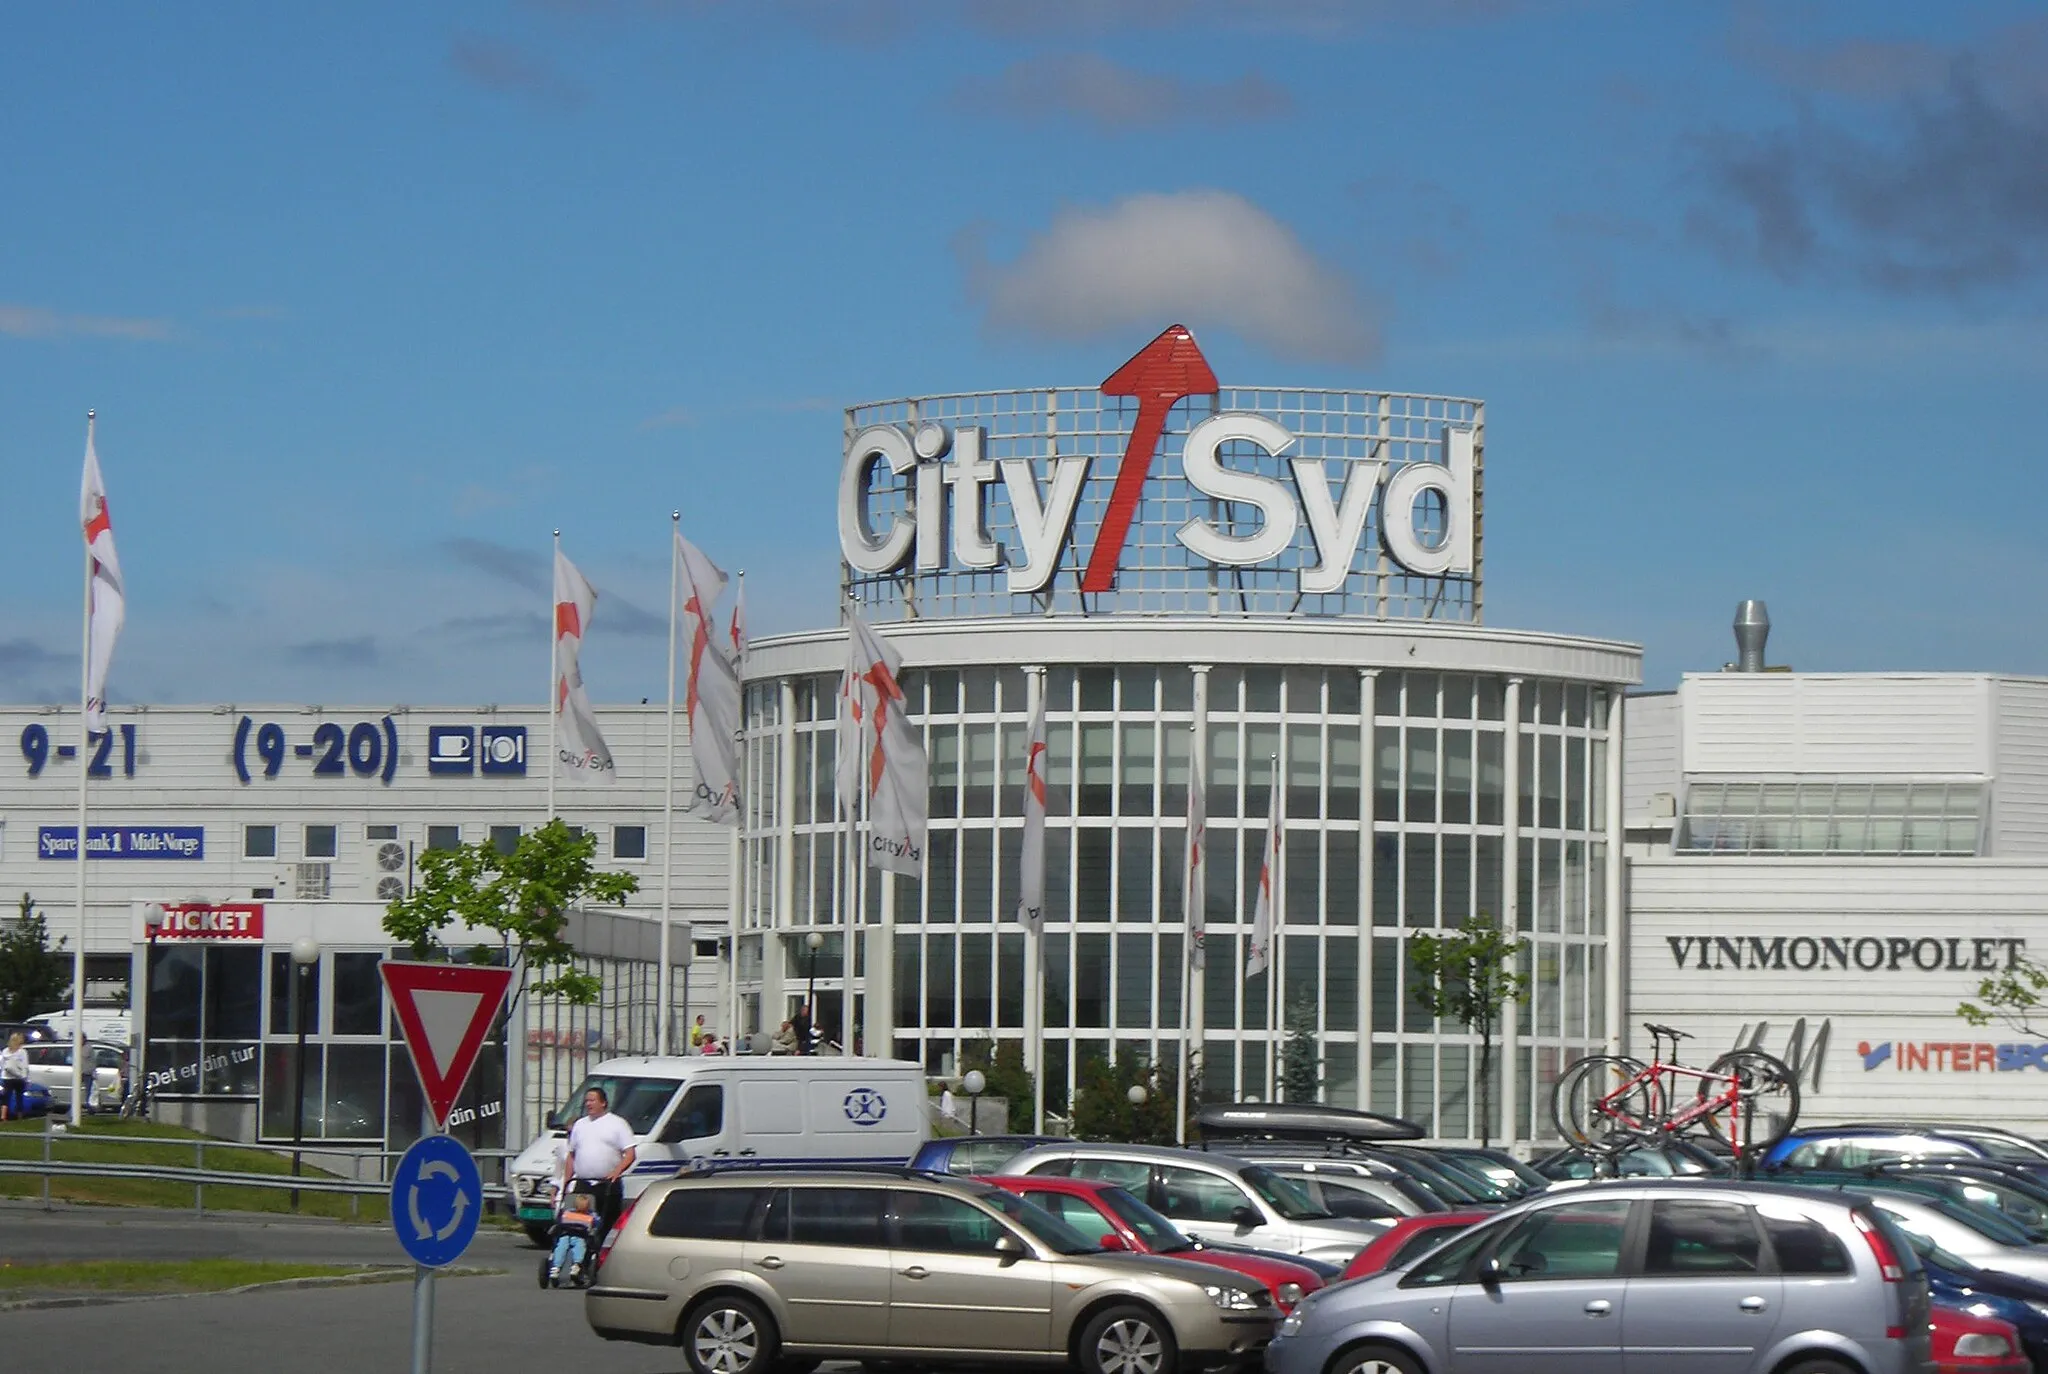 Photo showing: The City Syd mall in Trondheim